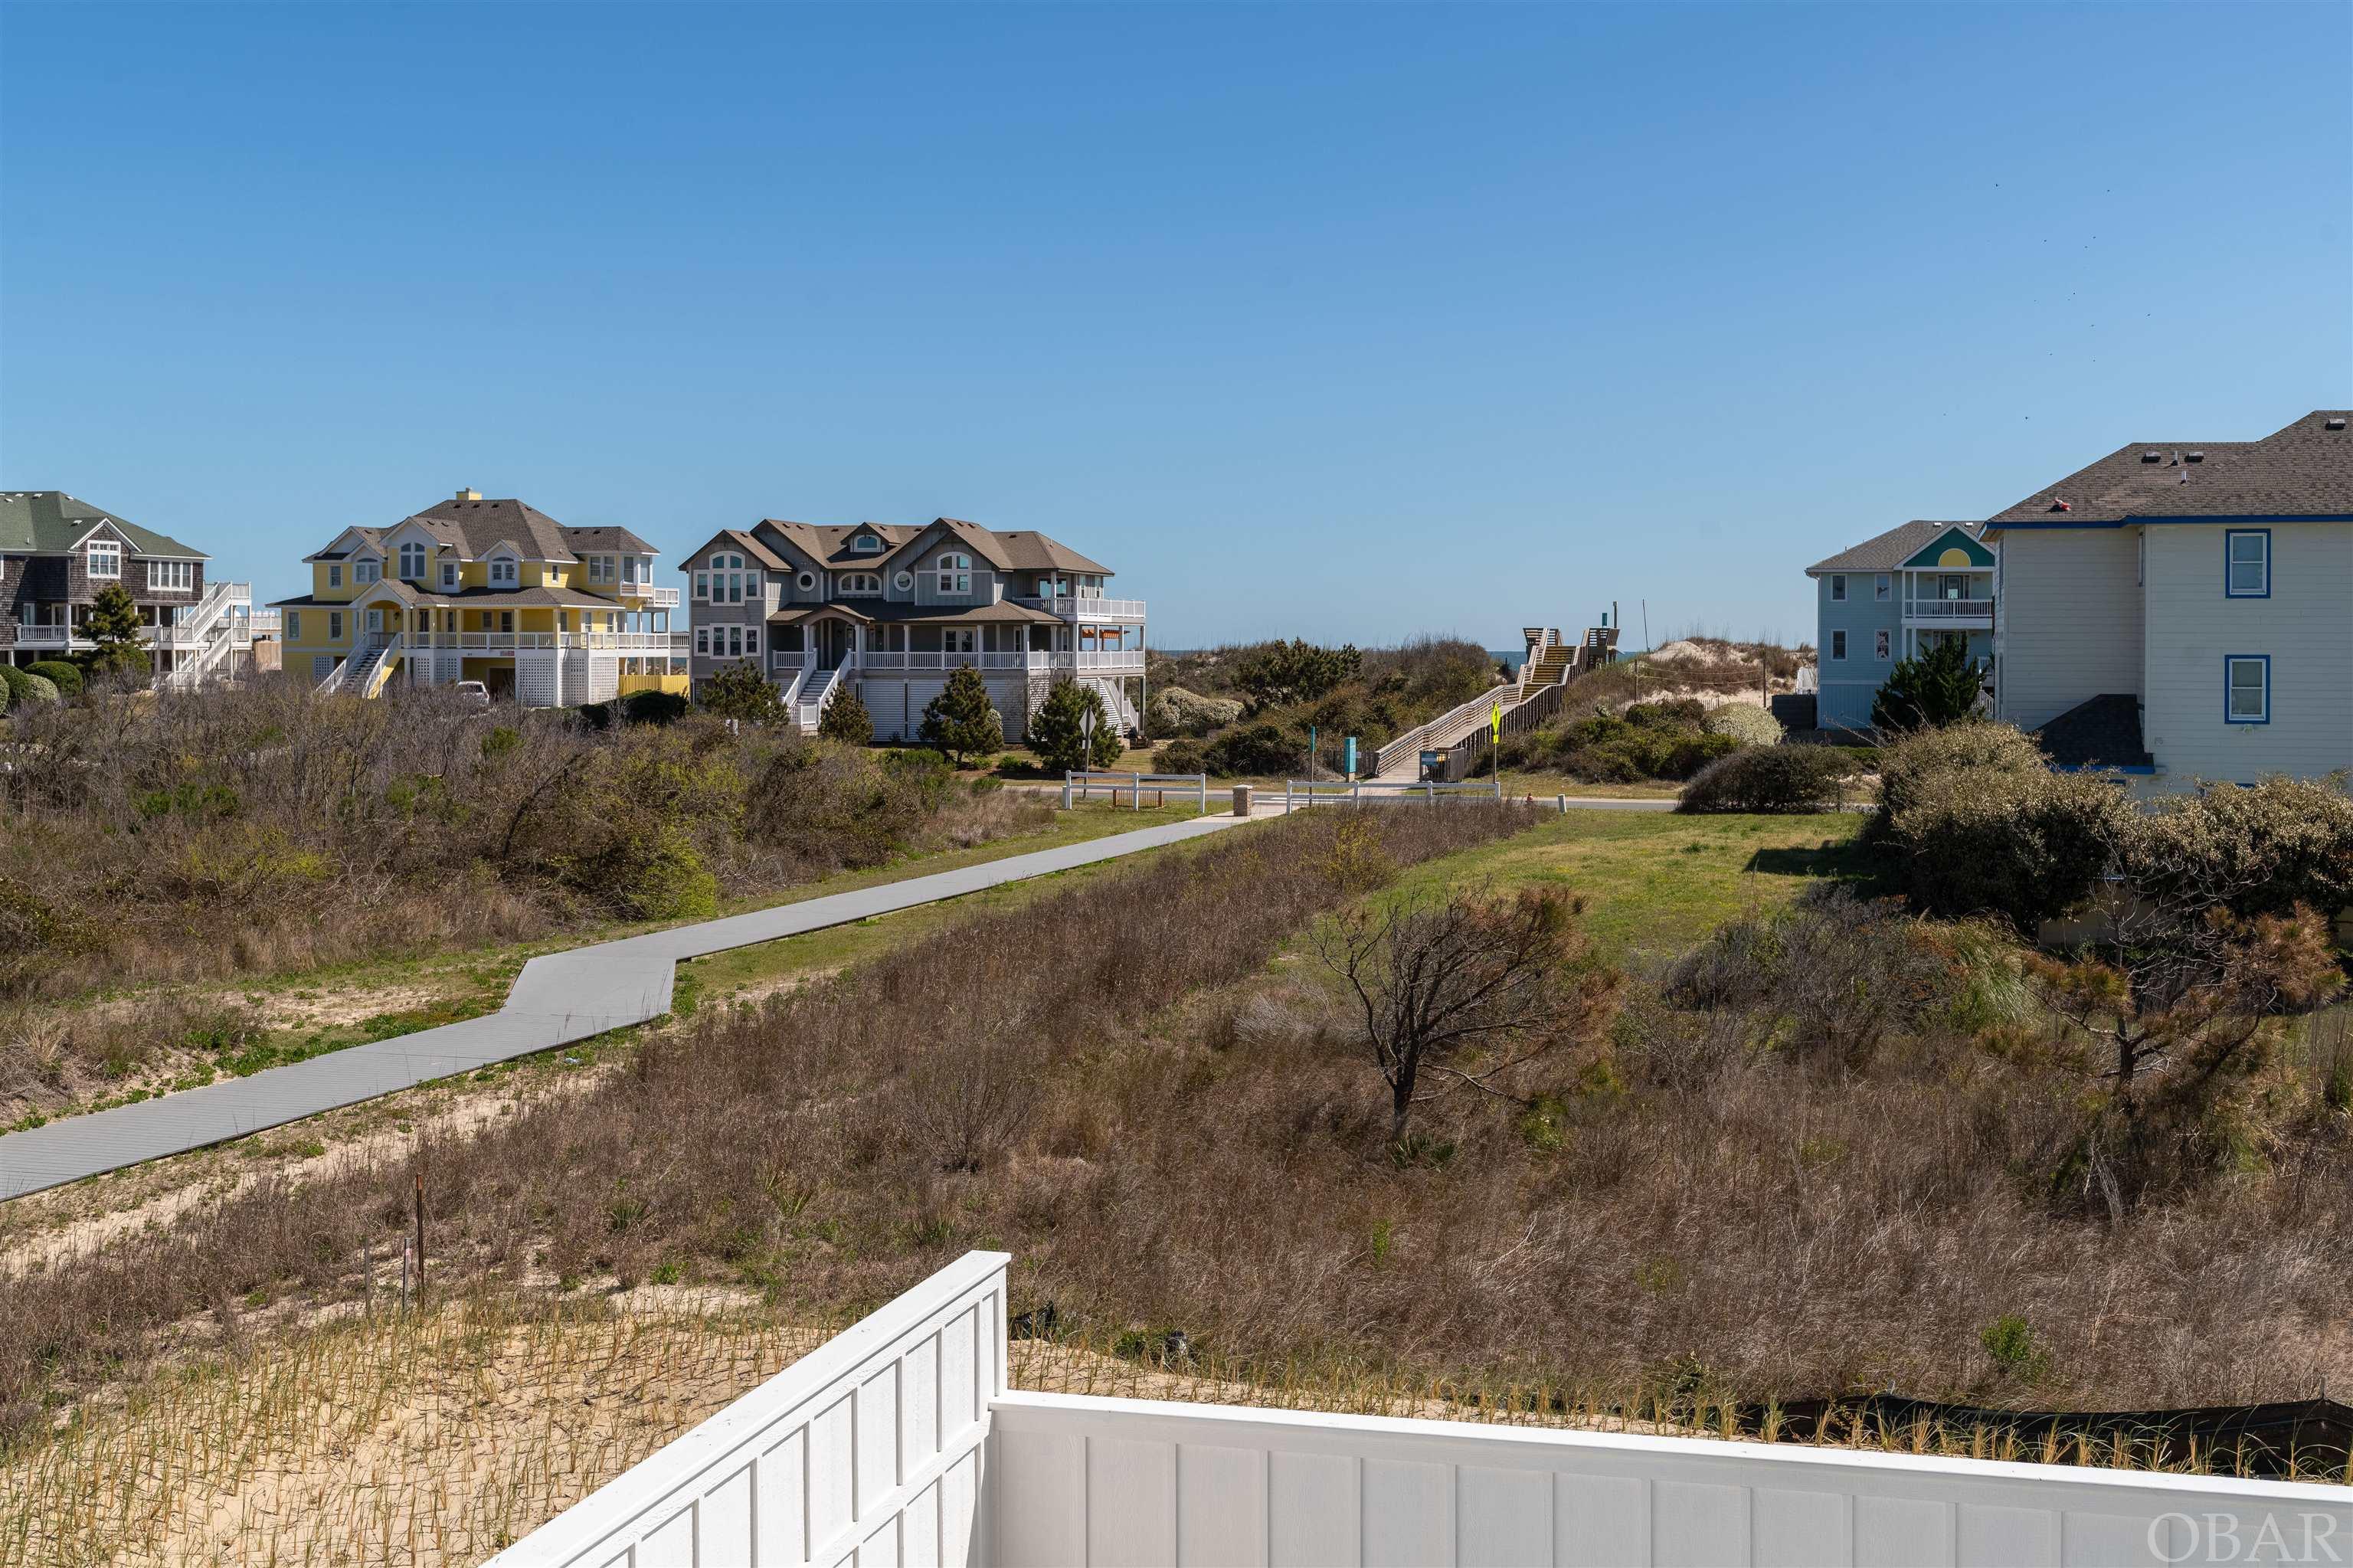 871 Whalehead Drive, Corolla, NC 27927, 12 Bedrooms Bedrooms, ,12 BathroomsBathrooms,Residential,For sale,Whalehead Drive,125248